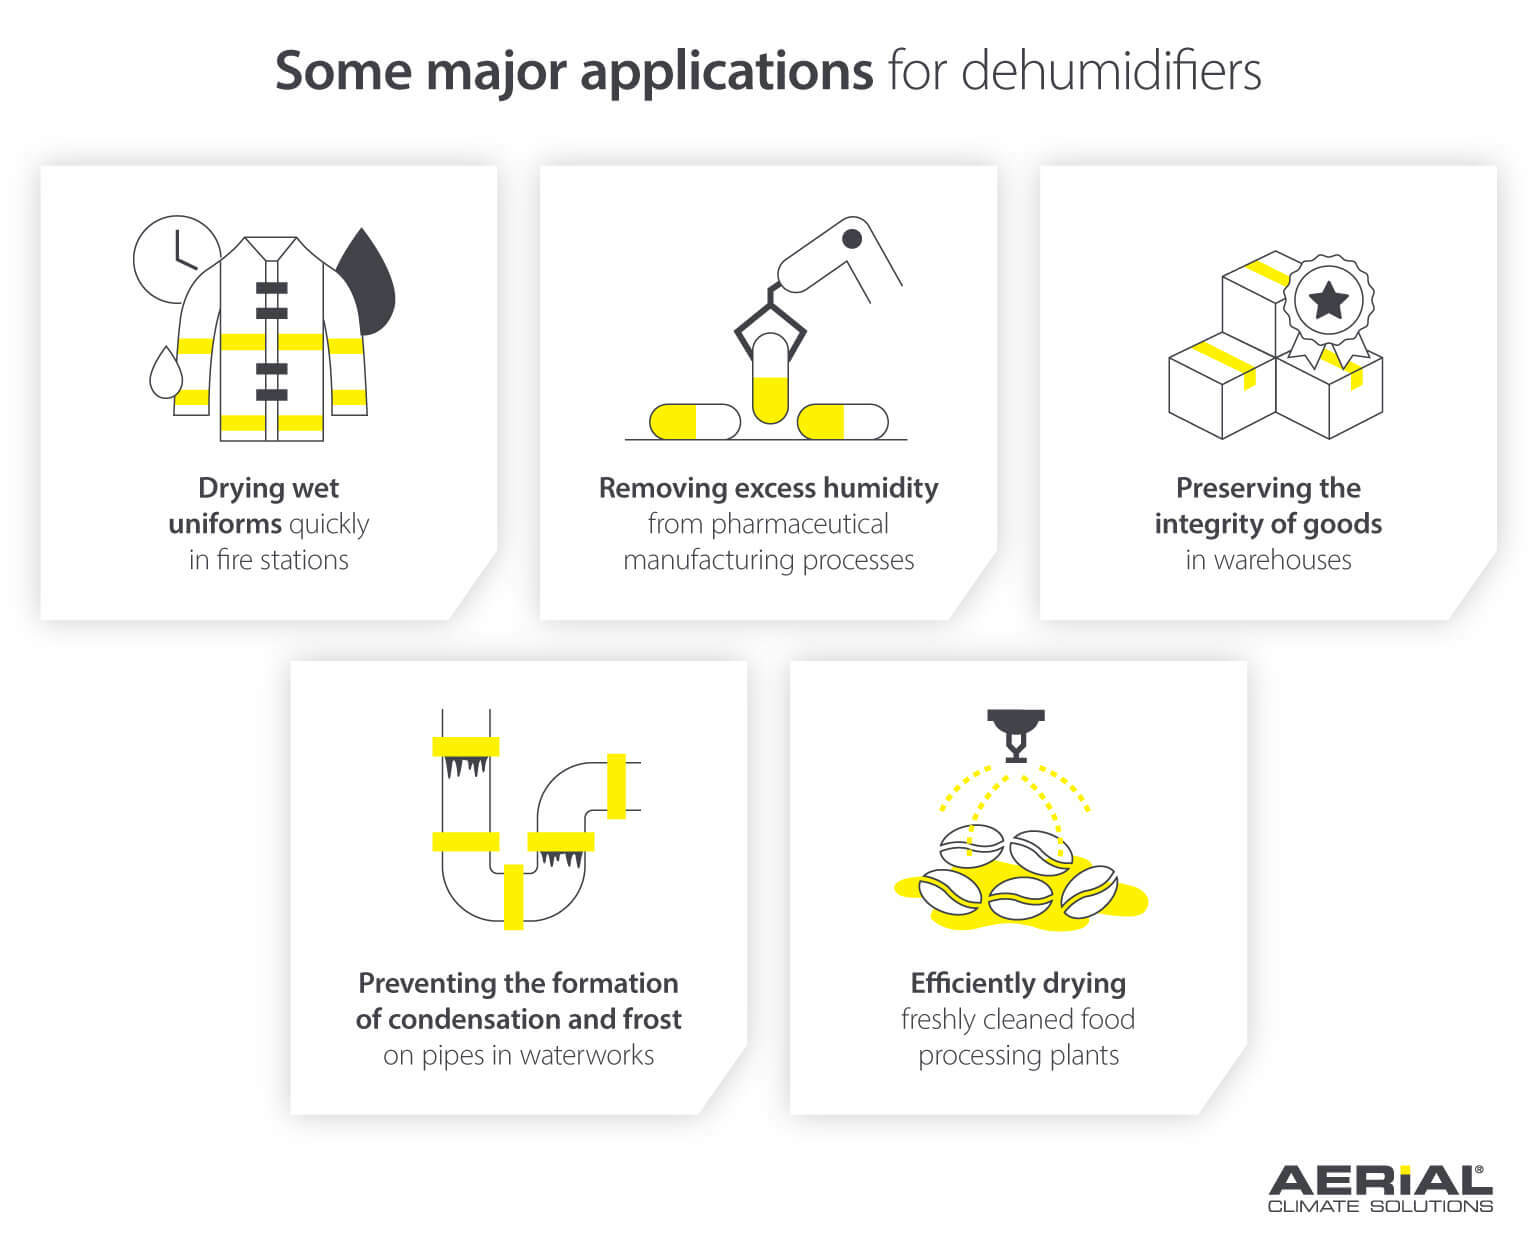 Commercial dehumidifier applications for drying, preserving and removing humidity - Infographic image